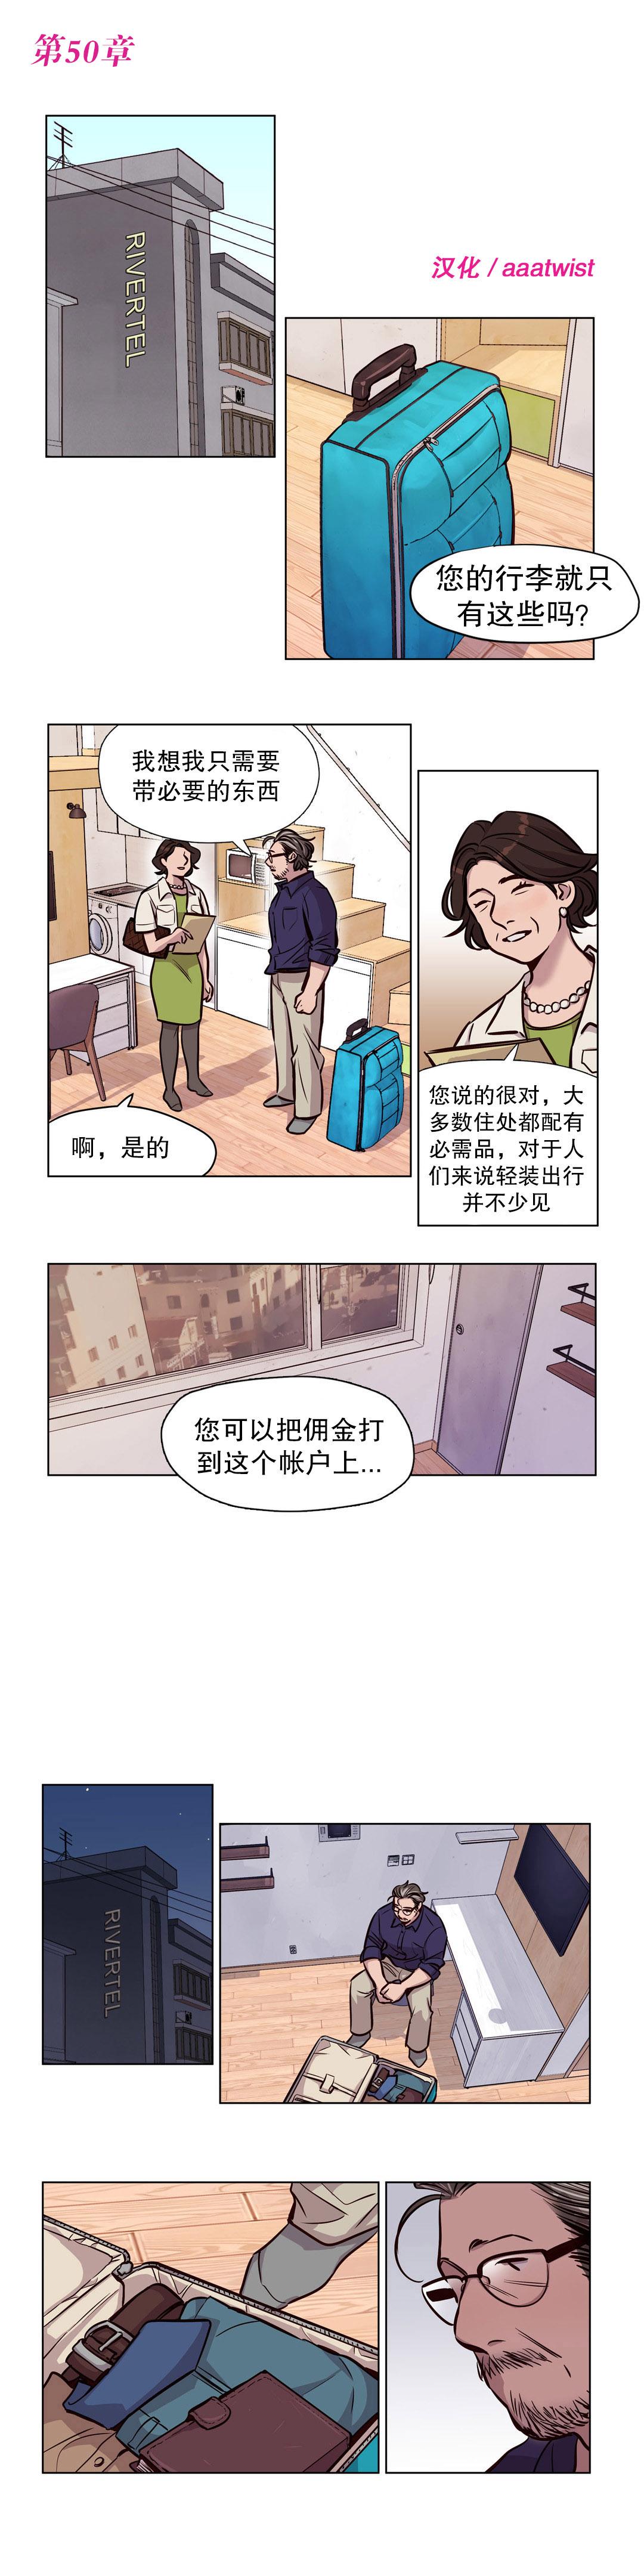 [Ramjak] 赎罪营(Atonement Camp) Ch.50-51 (Chinese) 0